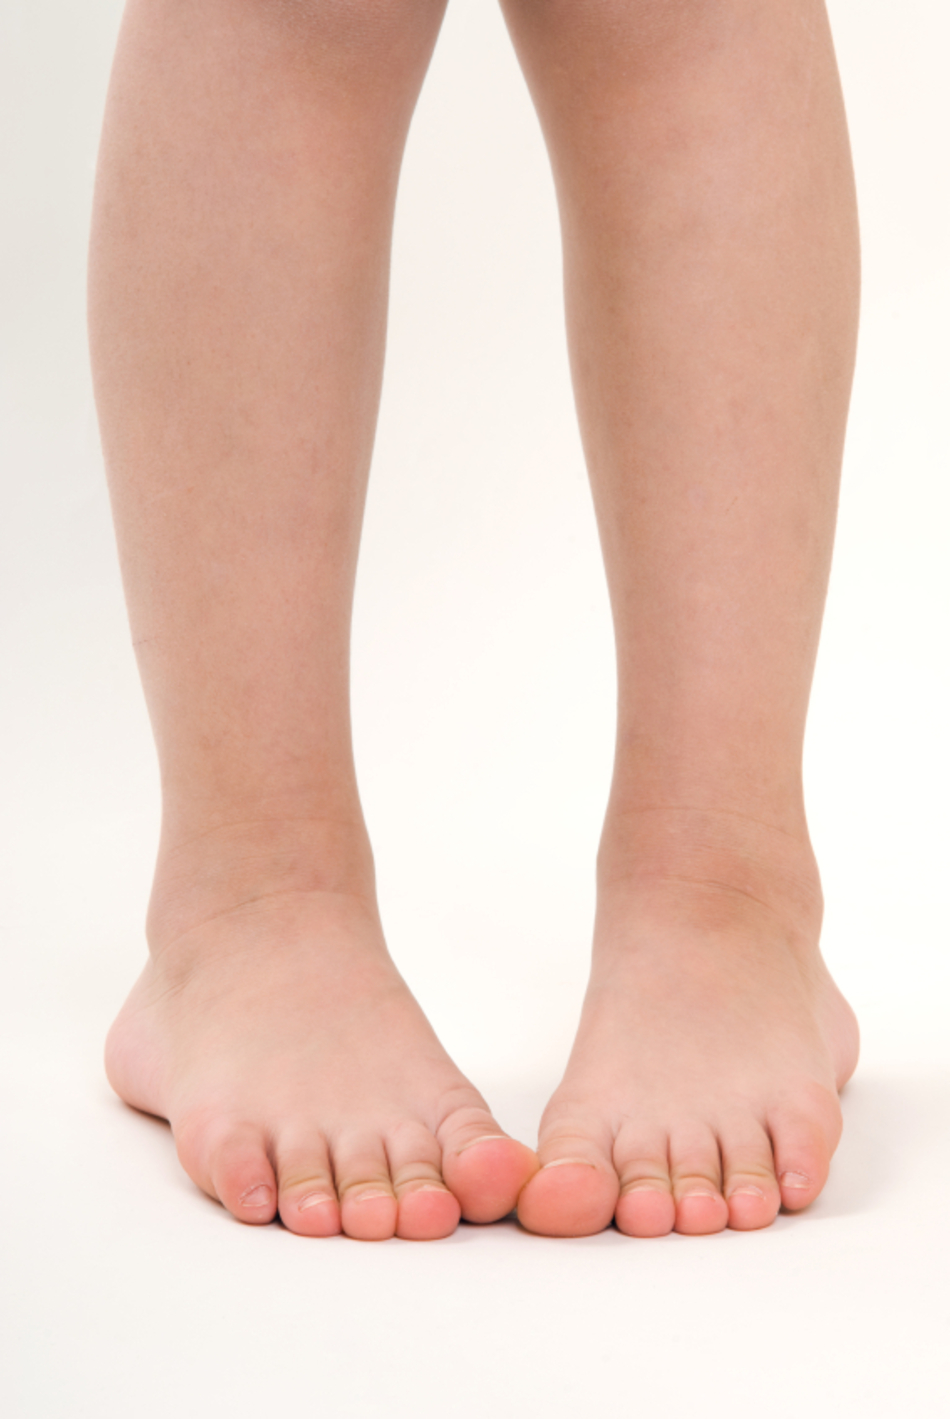 Does Your Child Have Pigeon Feet? When It's Normal – And When It's Not